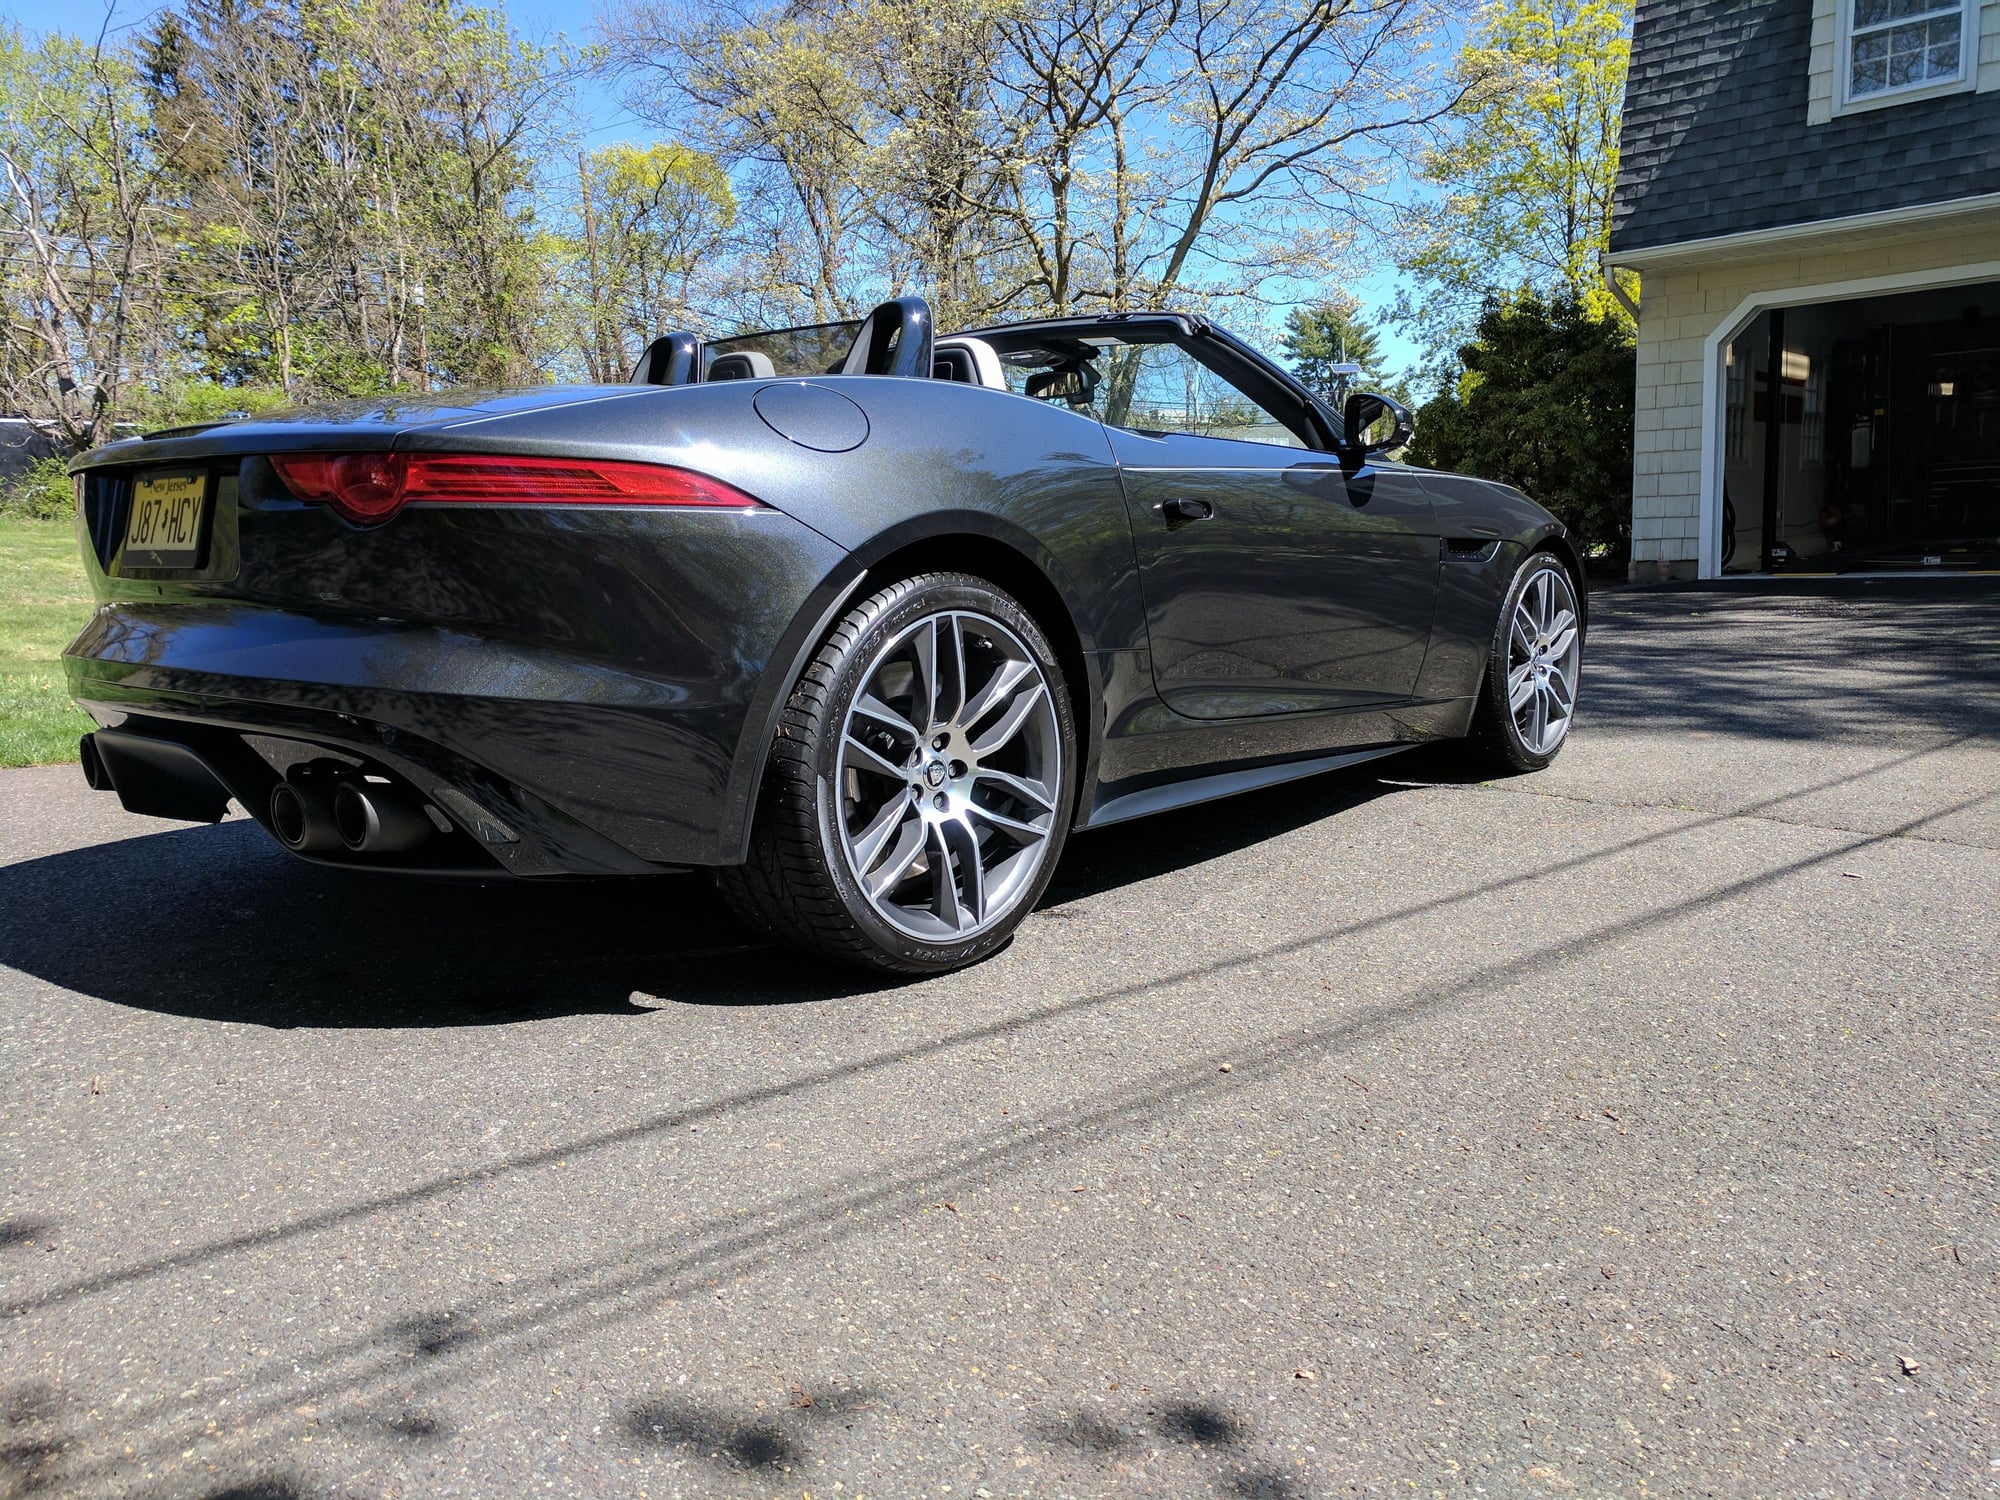 2015 Jaguar F-Type - Stratus Grey f type V8S - Used - VIN SAJWA6GLXFMK18685 - 5,223 Miles - 8 cyl - Automatic - Convertible - Gray - Watchung, NJ 07069, United States